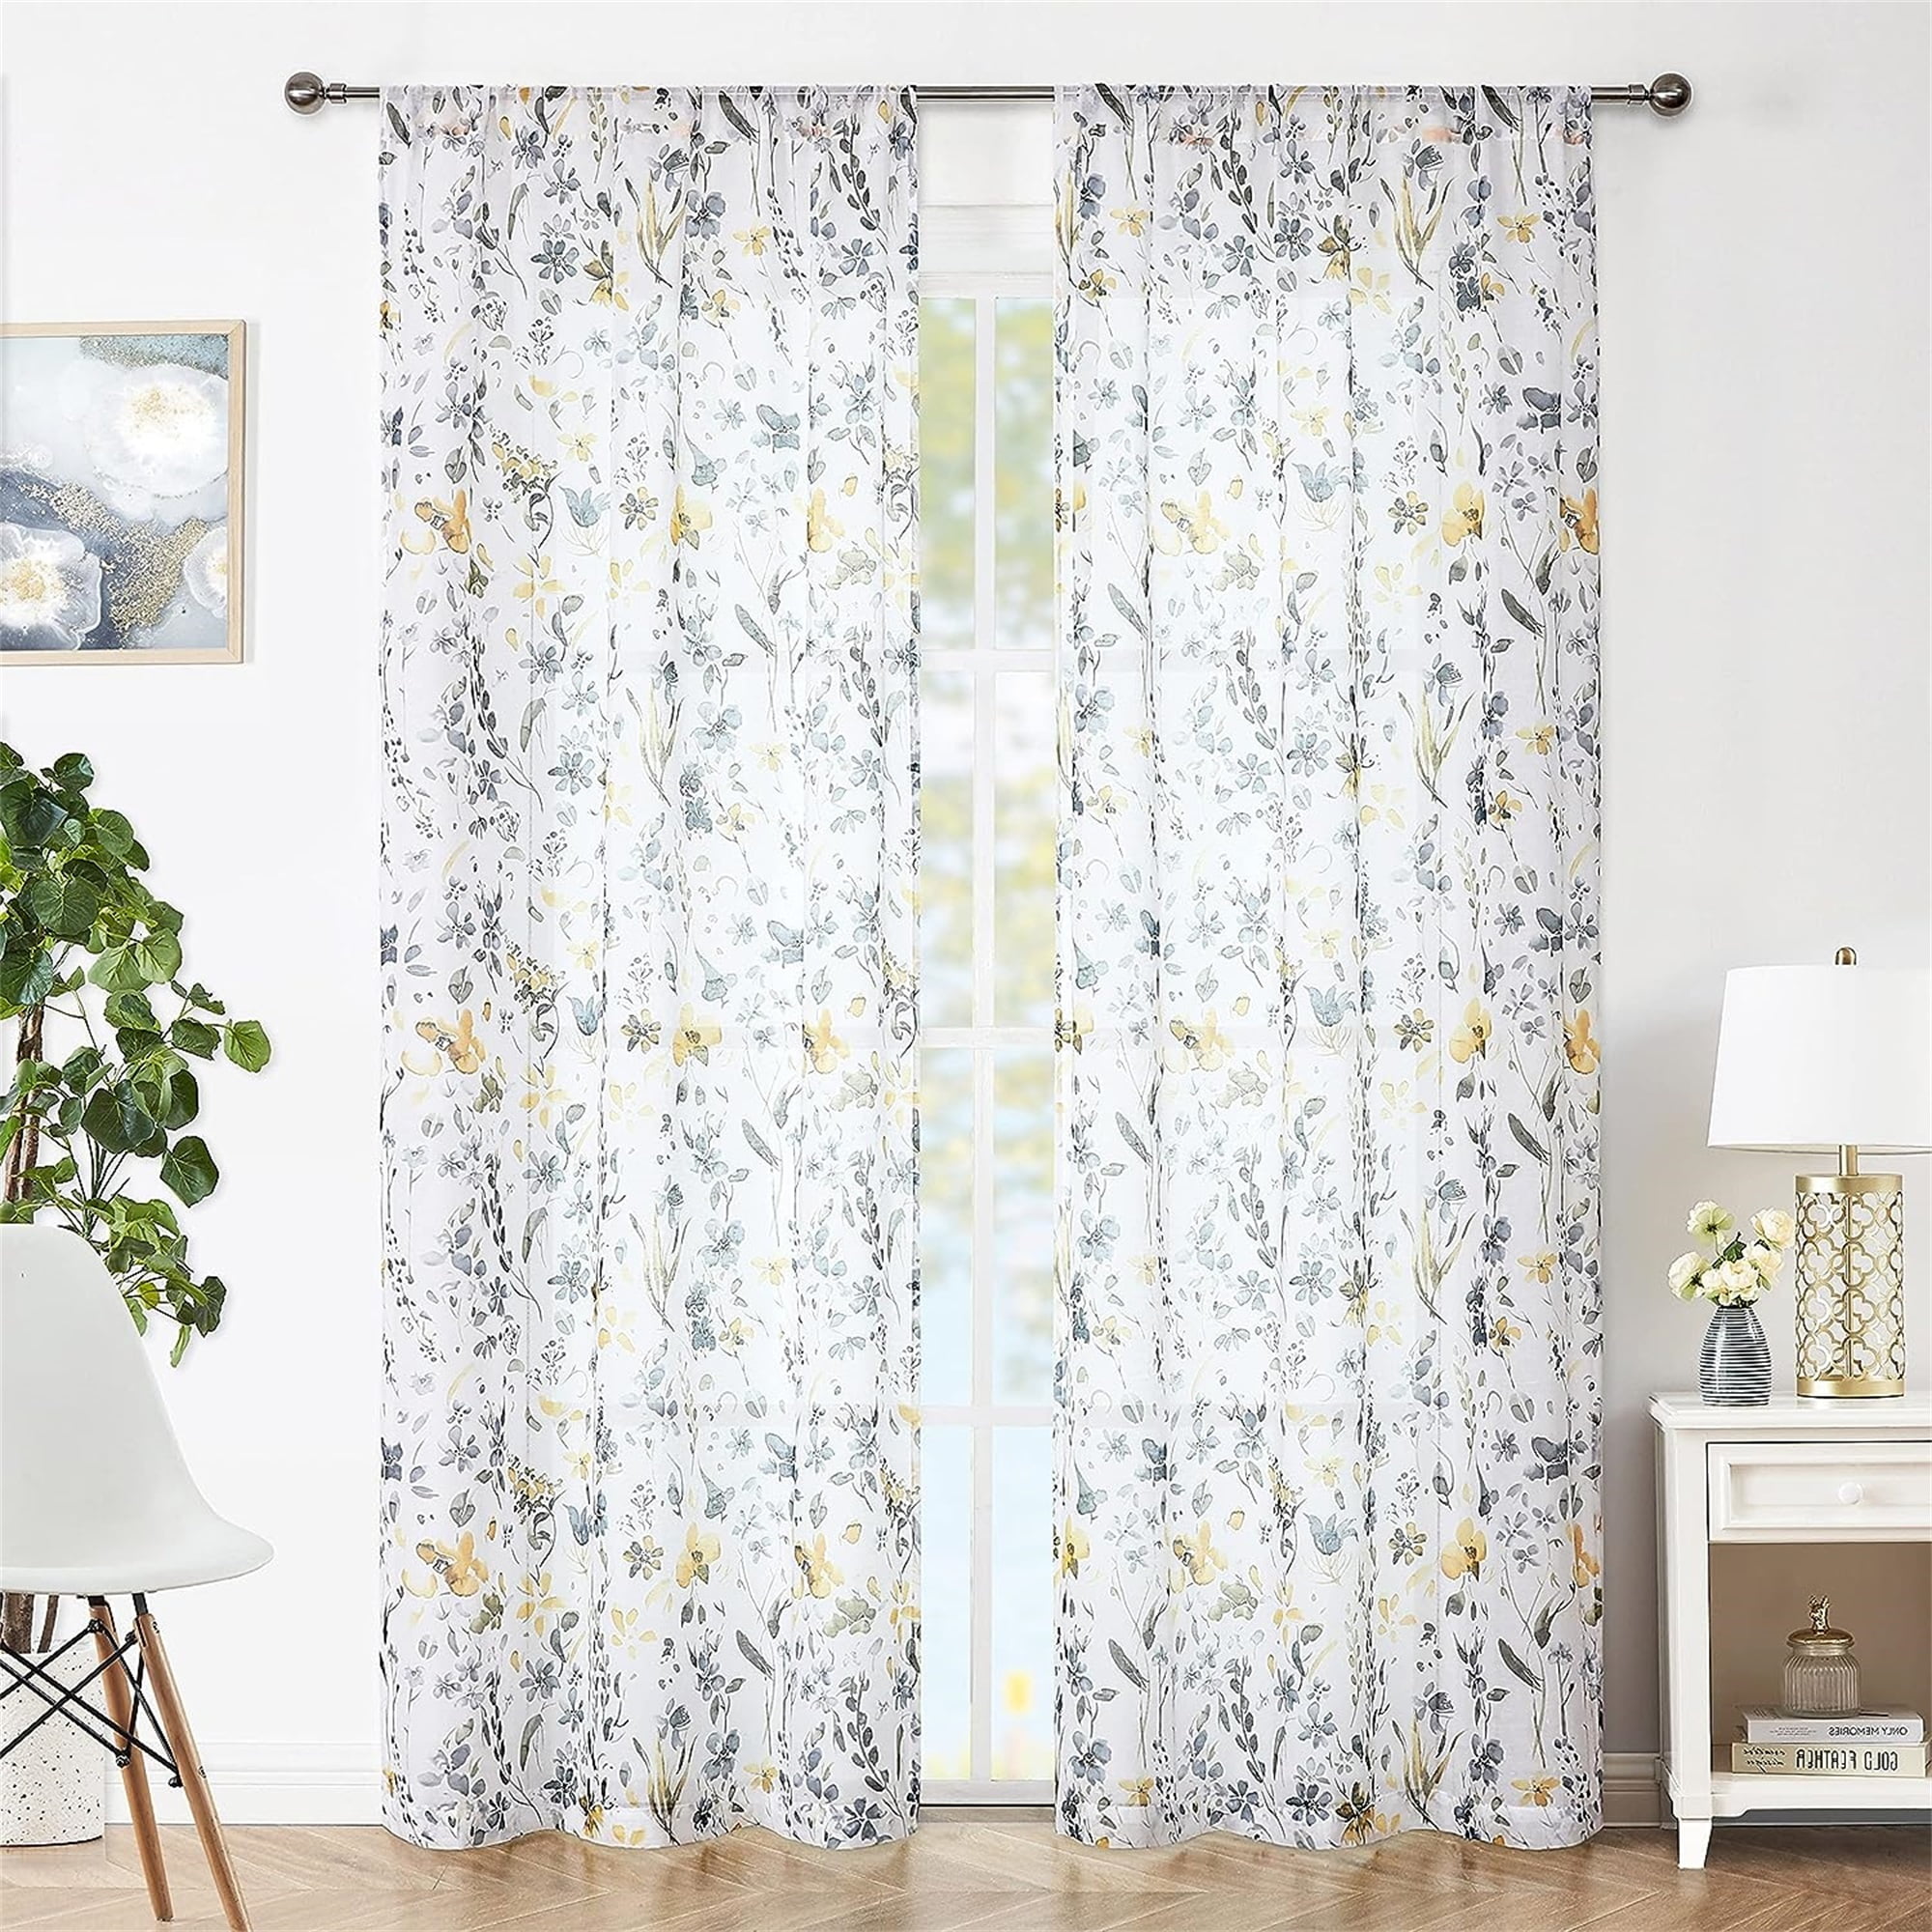 Fragrantex Yellow Sheer Floral Curtains 63 inch Length Yellow and Grey Flower Living Room Curtains,Rod Pocket,2 Panels